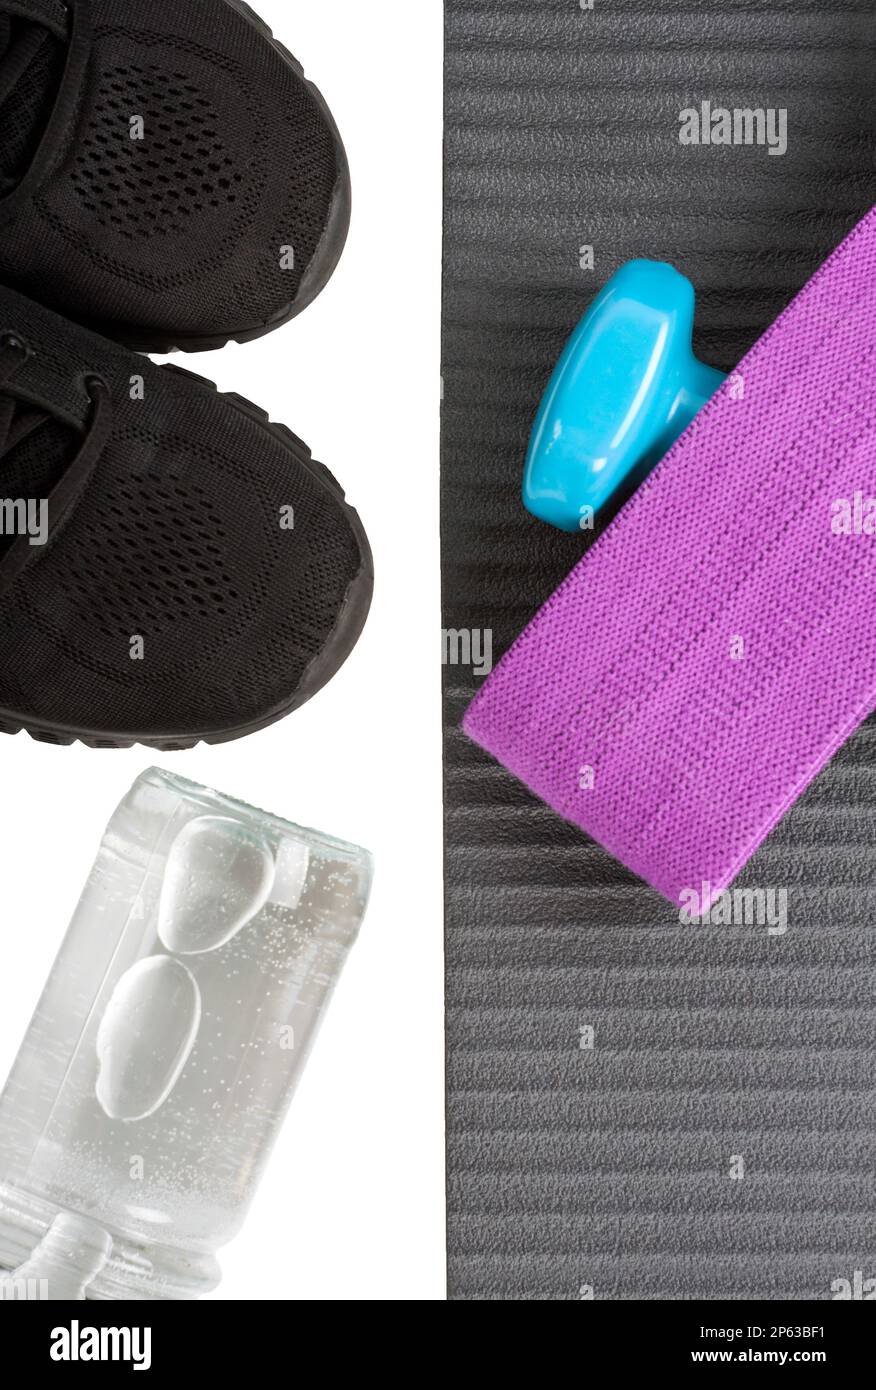 Top view yoga mat dumbbeell, shoe, bottle of water and fitness elastic band. Concept sport and healty life. Stock Photo